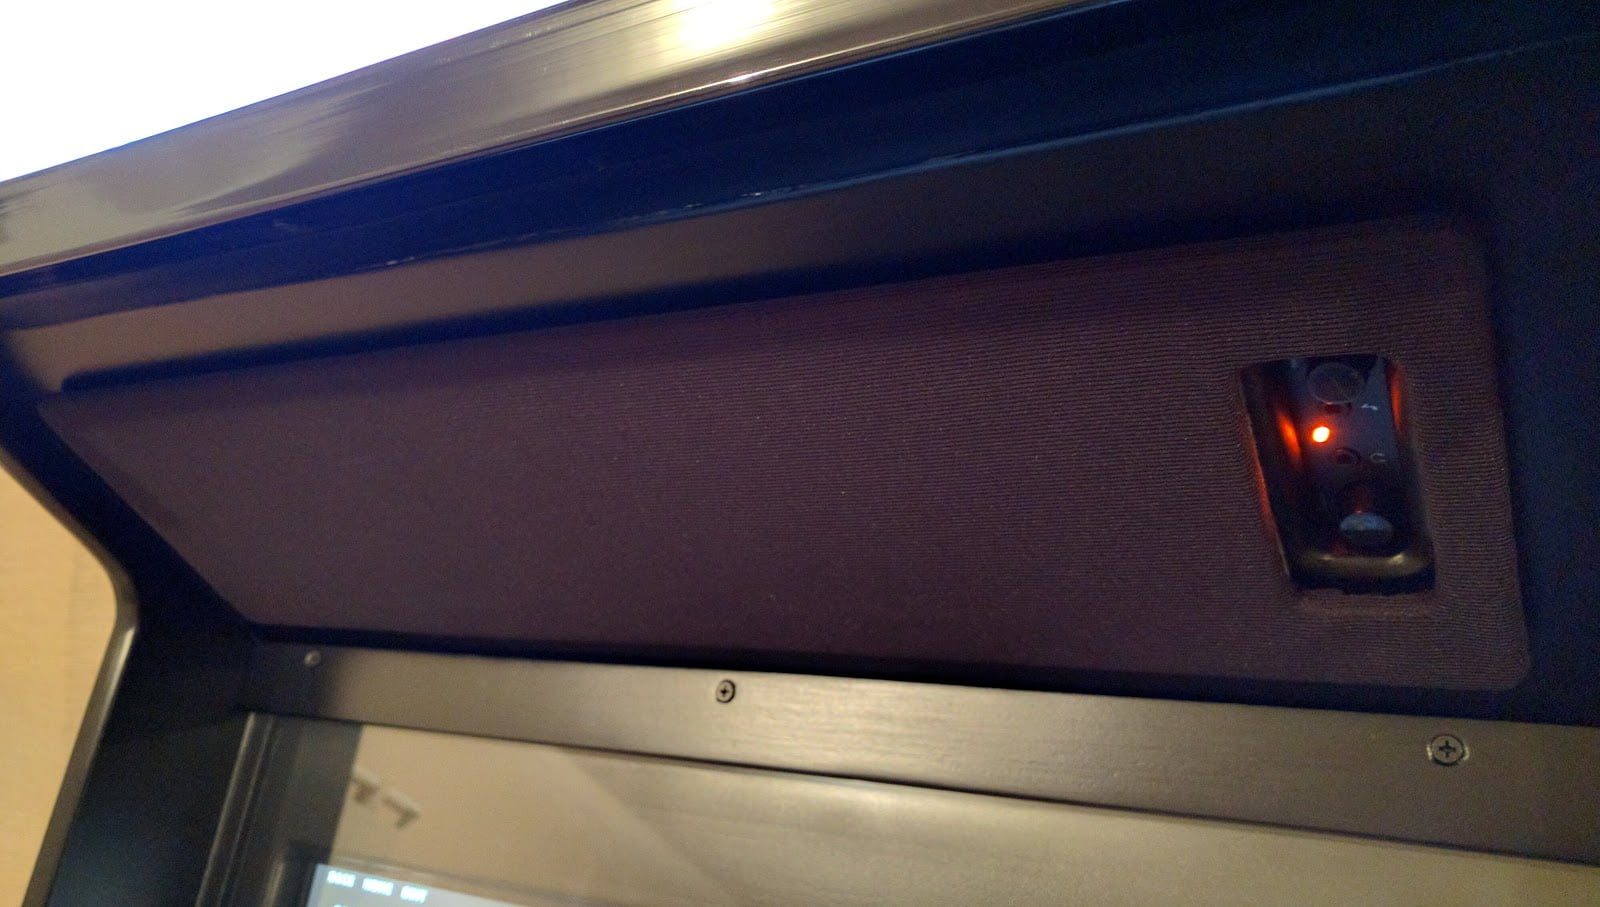 A speaker grill, above the monitor on an arcade cabinet. The grill is a rectangonal panel covered completely in black speaker fabric. On the right side of the panel is a cutout, giving access to the volume & power controls for the speakers mounted behind the panel.